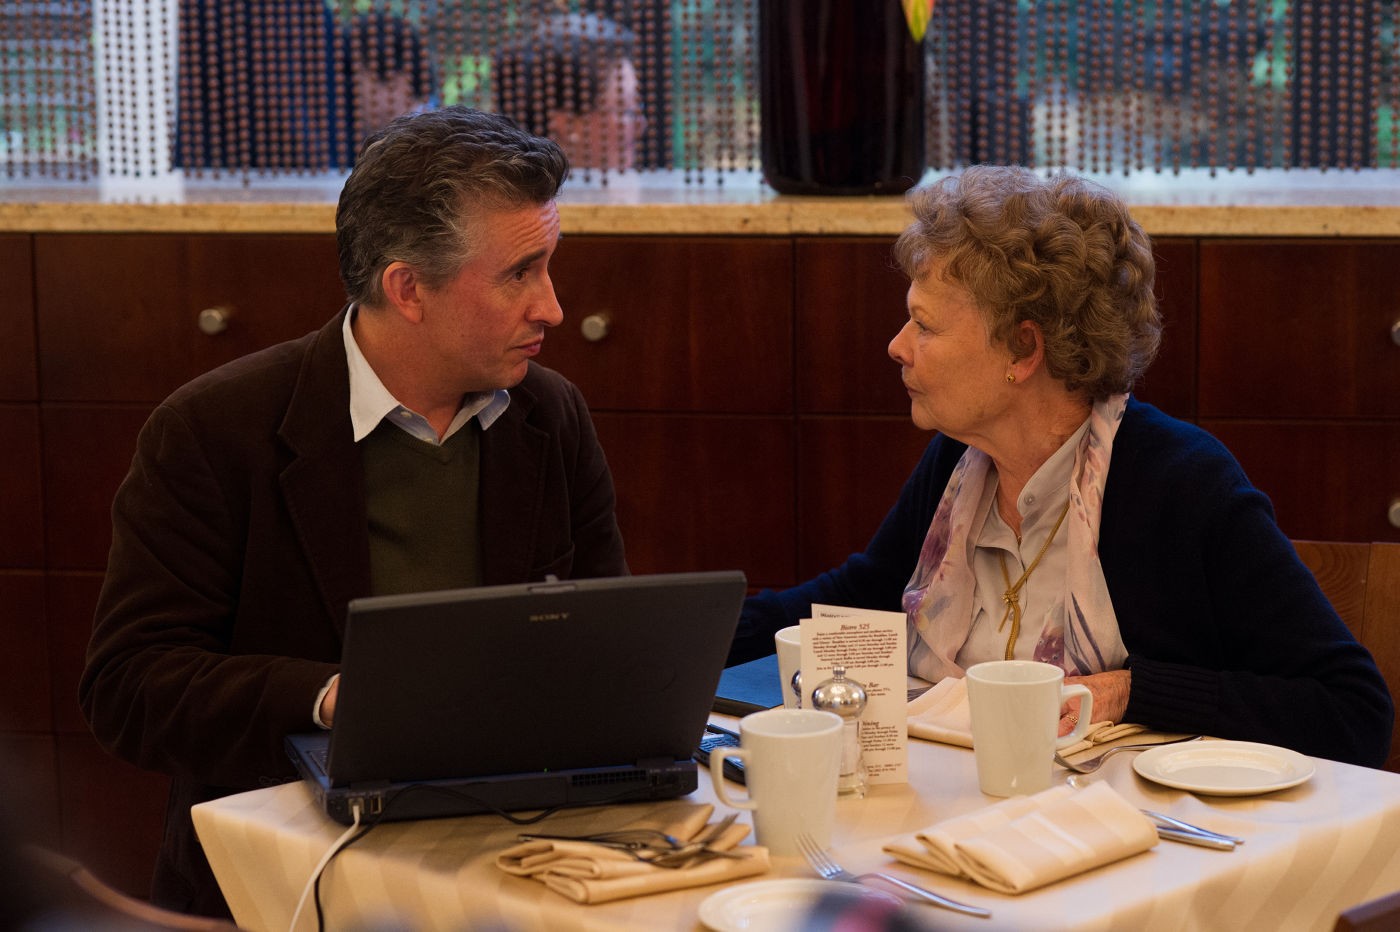 Steve Coogan stars as Martin Sixsmith and Judi Dench stars as Philomena Lee in The Weinstein Company's Philomena (2013)